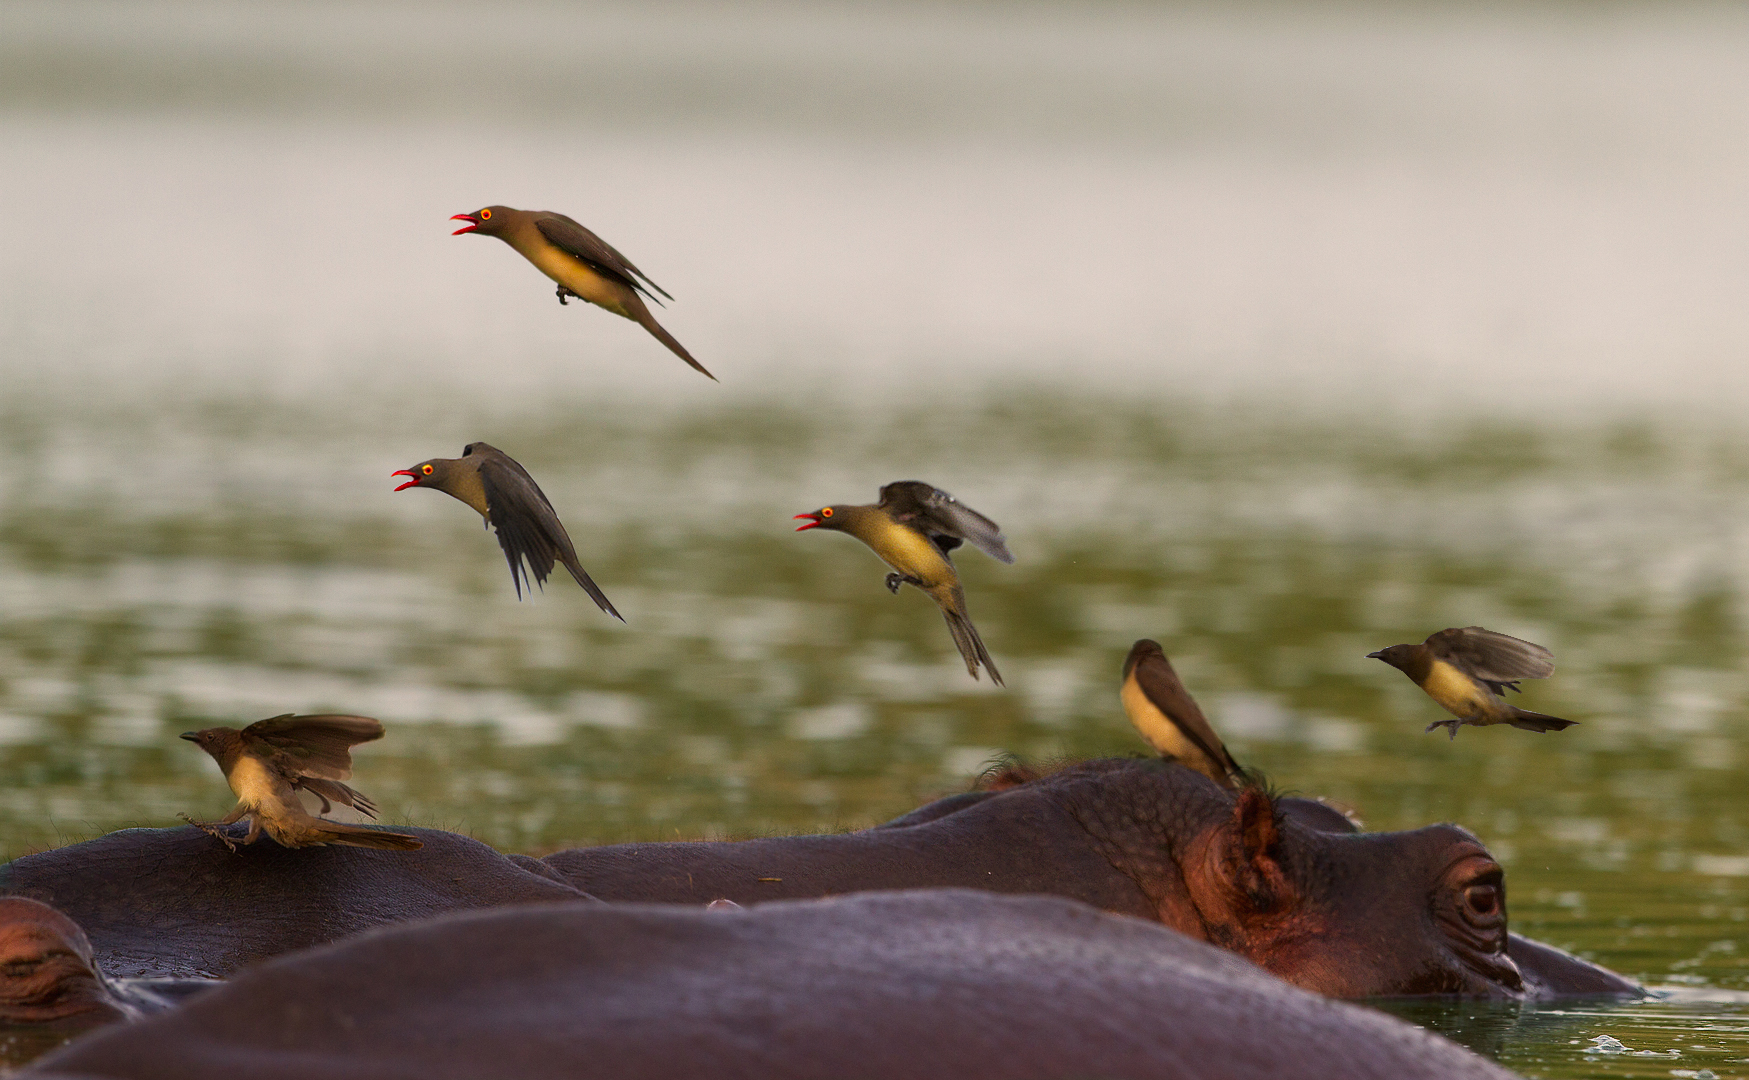 Red billed oxpeckers going for a meal...